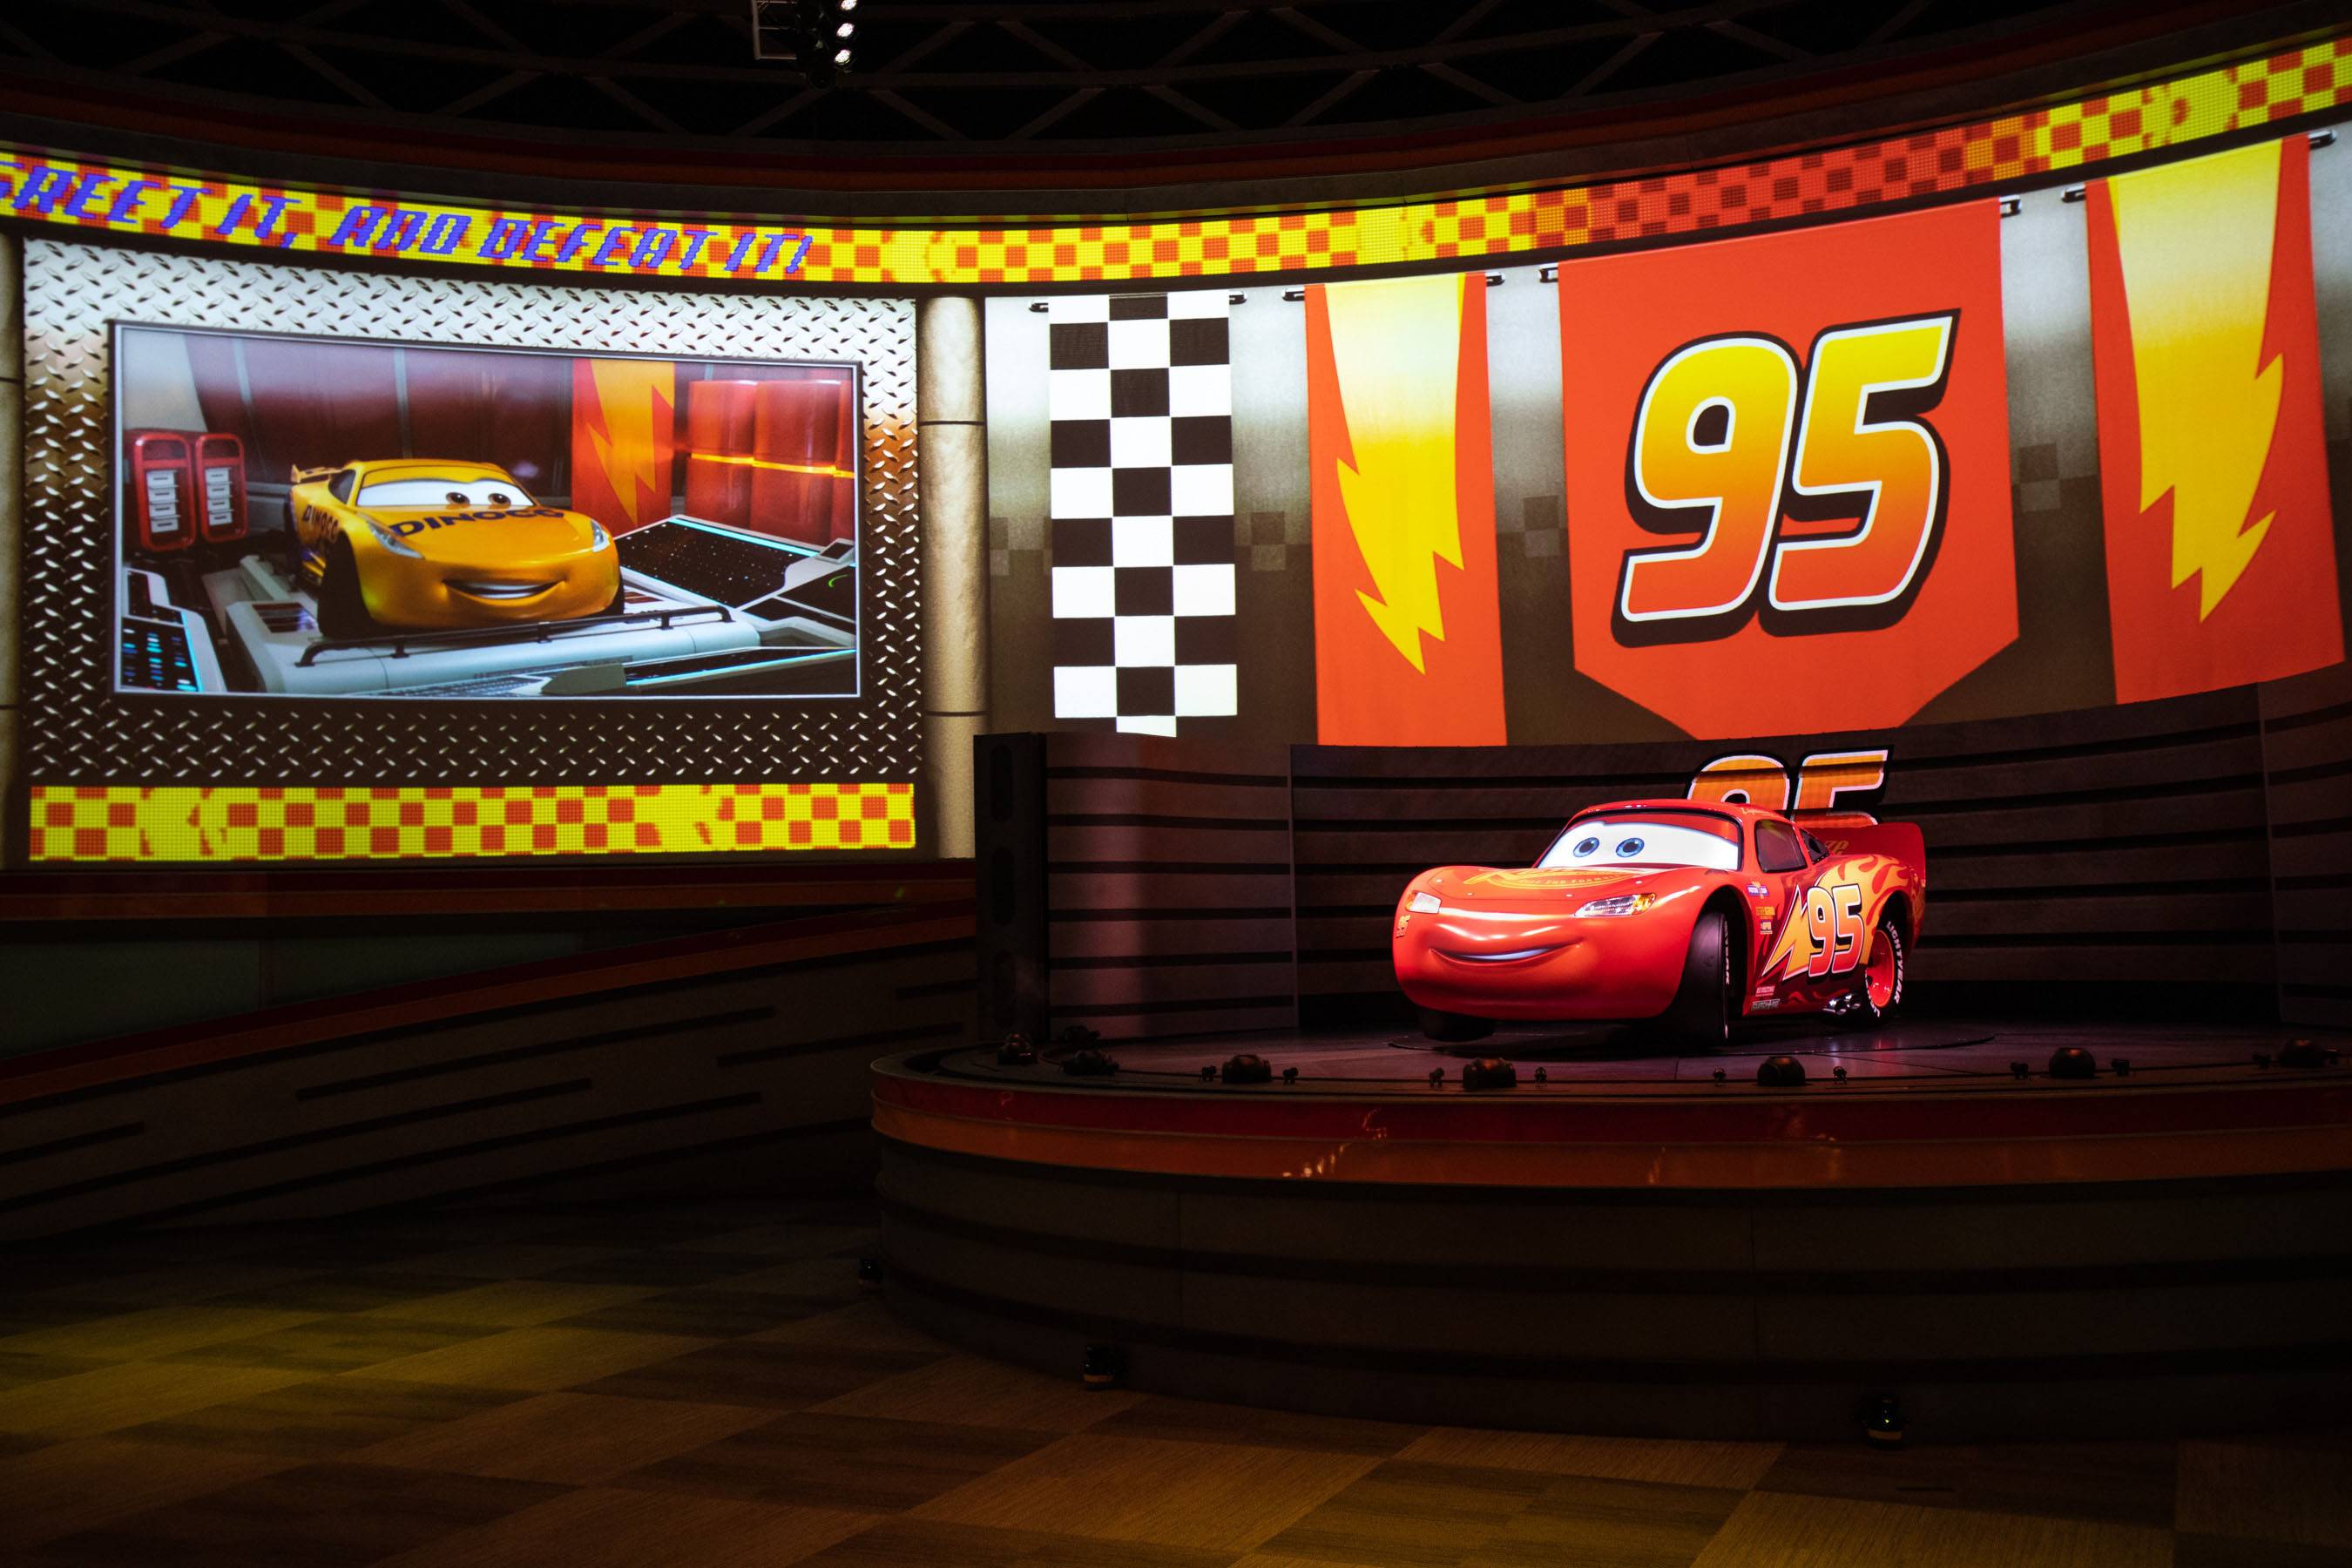 Lightning McQueen's Racing Academy is experiencing extended downtime at  Disney's Hollywood Studios